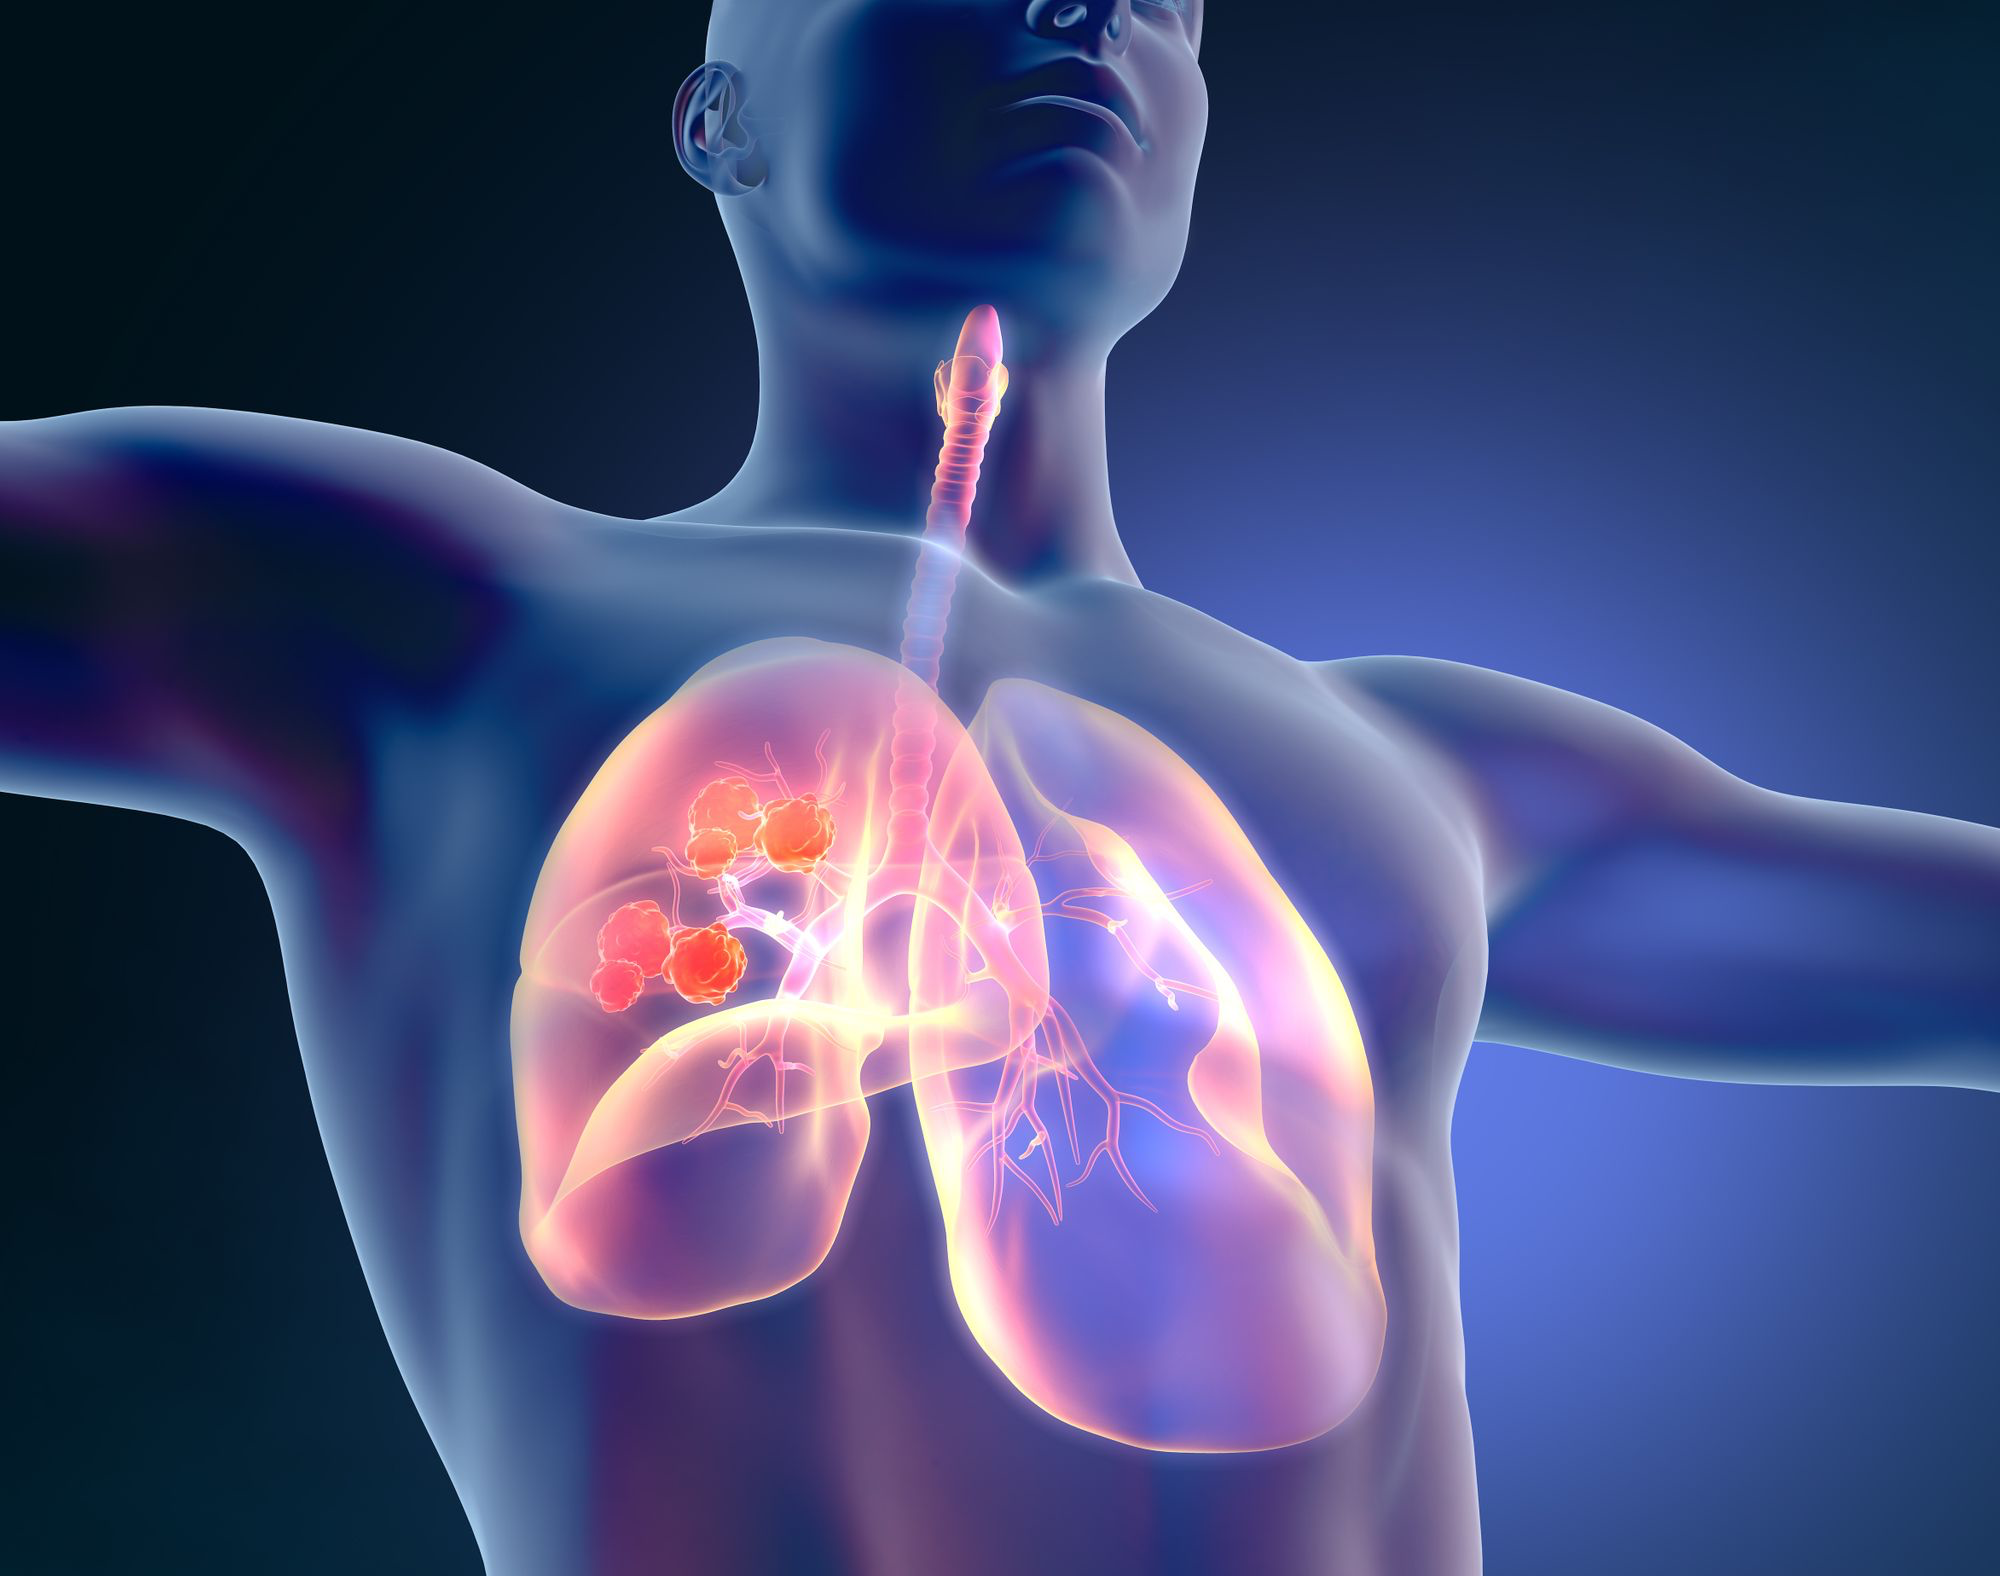 Phase 2 CITYSCAPE Trial Shows Promise for Tiragolumab in NSCLC